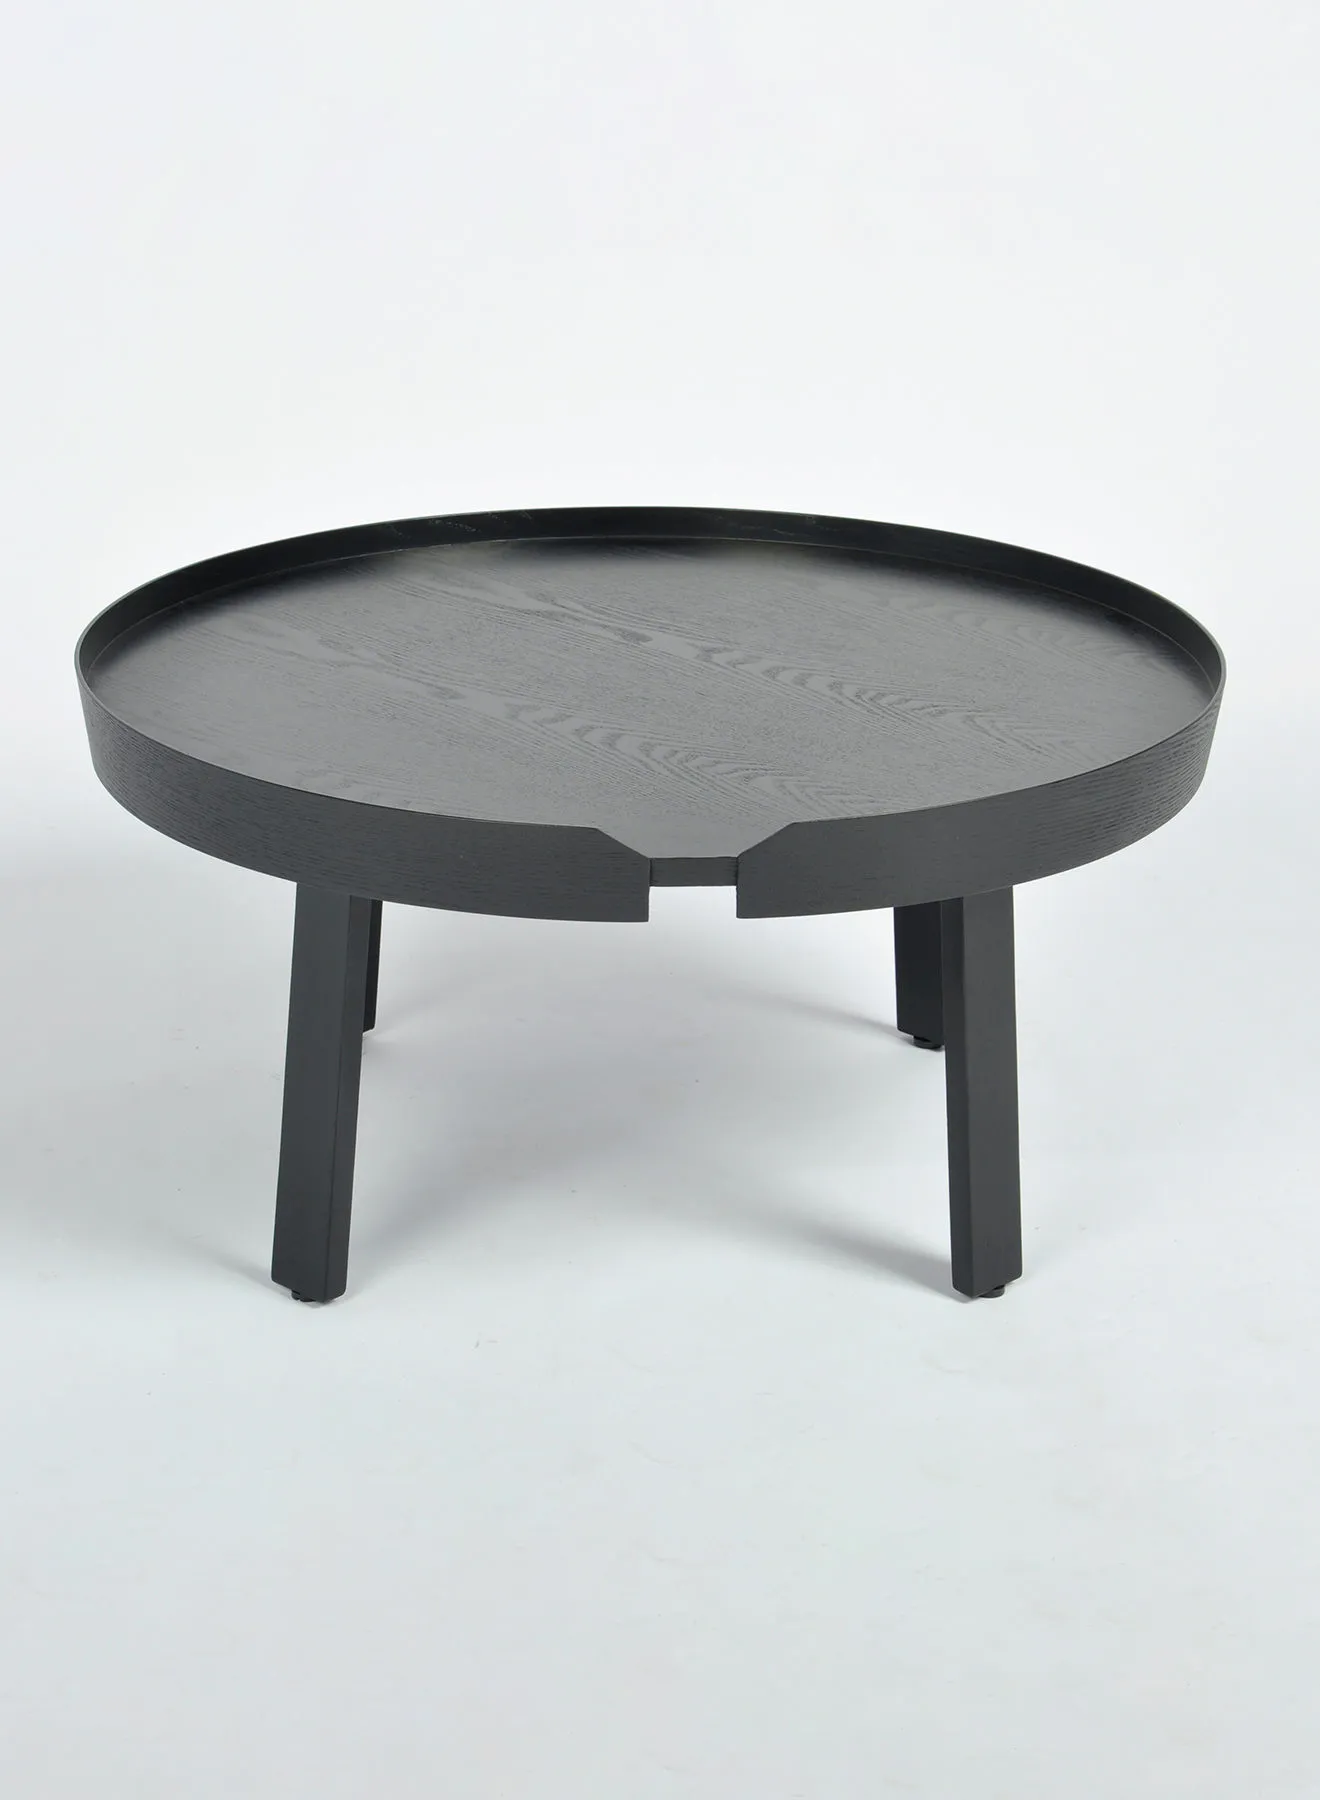 Switch Coffee Table Used As Coffee Corner And Side Table In Black - Size 72.5 X 72.5 X 37.5